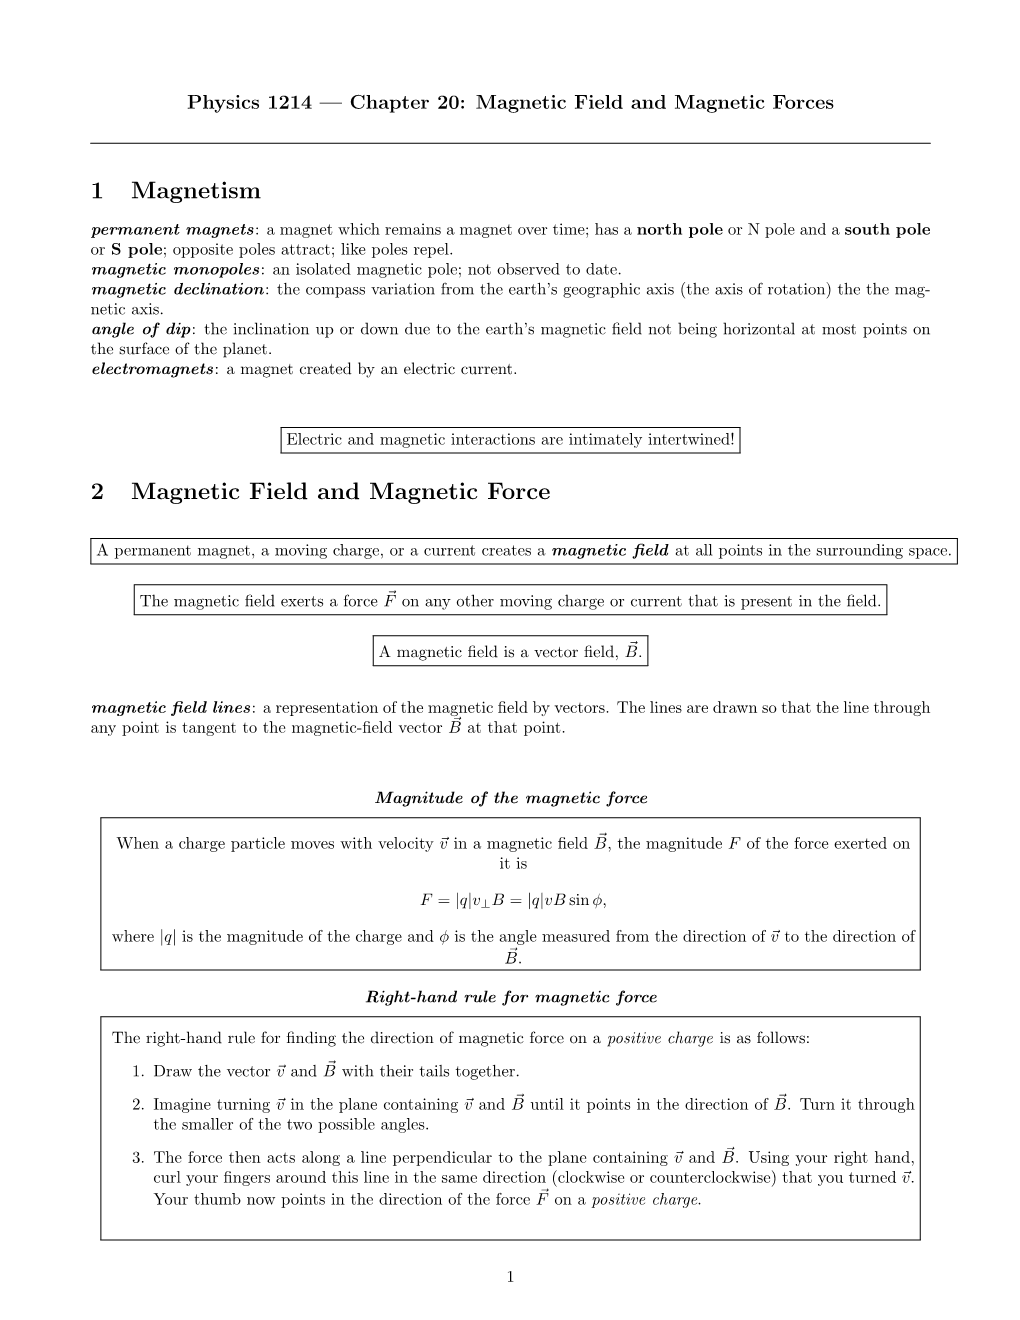 1 Magnetism 2 Magnetic Field and Magnetic Force